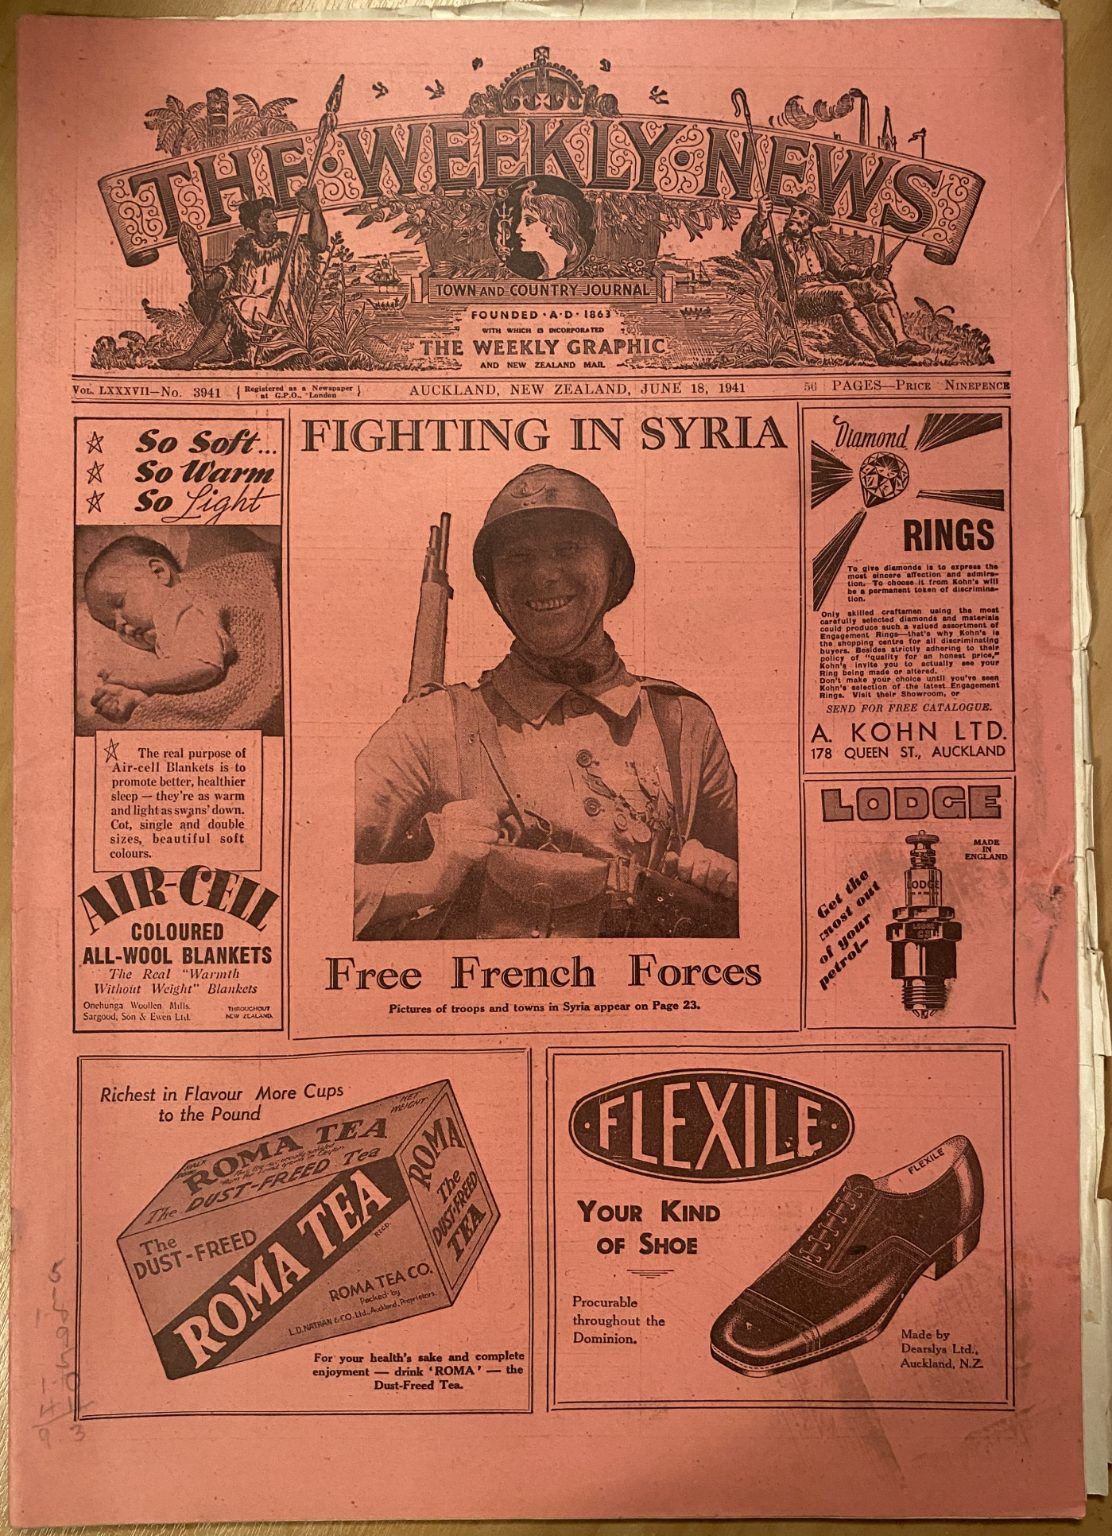 OLD NEWSPAPER: The Weekly News - No. 3941, 18 June 1941